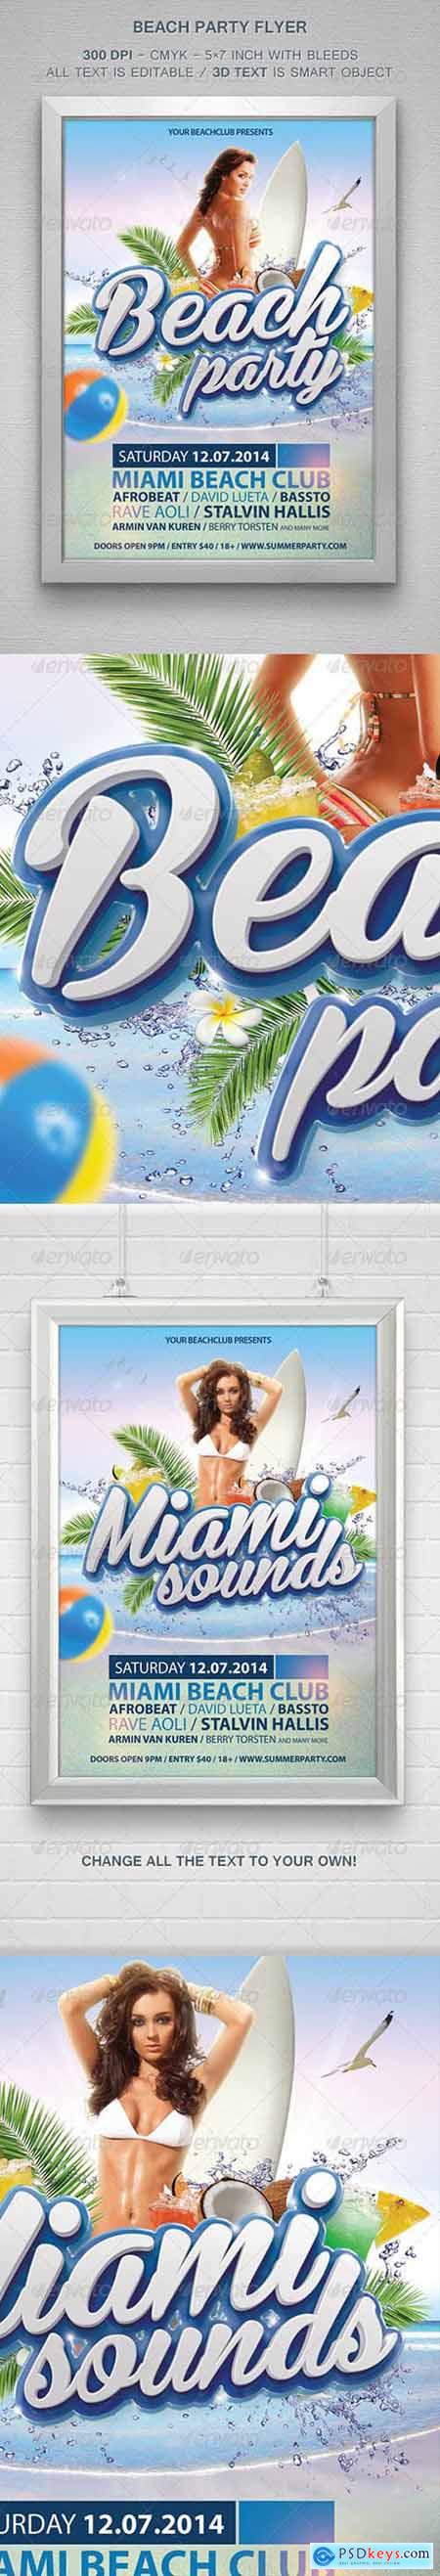 Graphicriver Beach Party Flyer